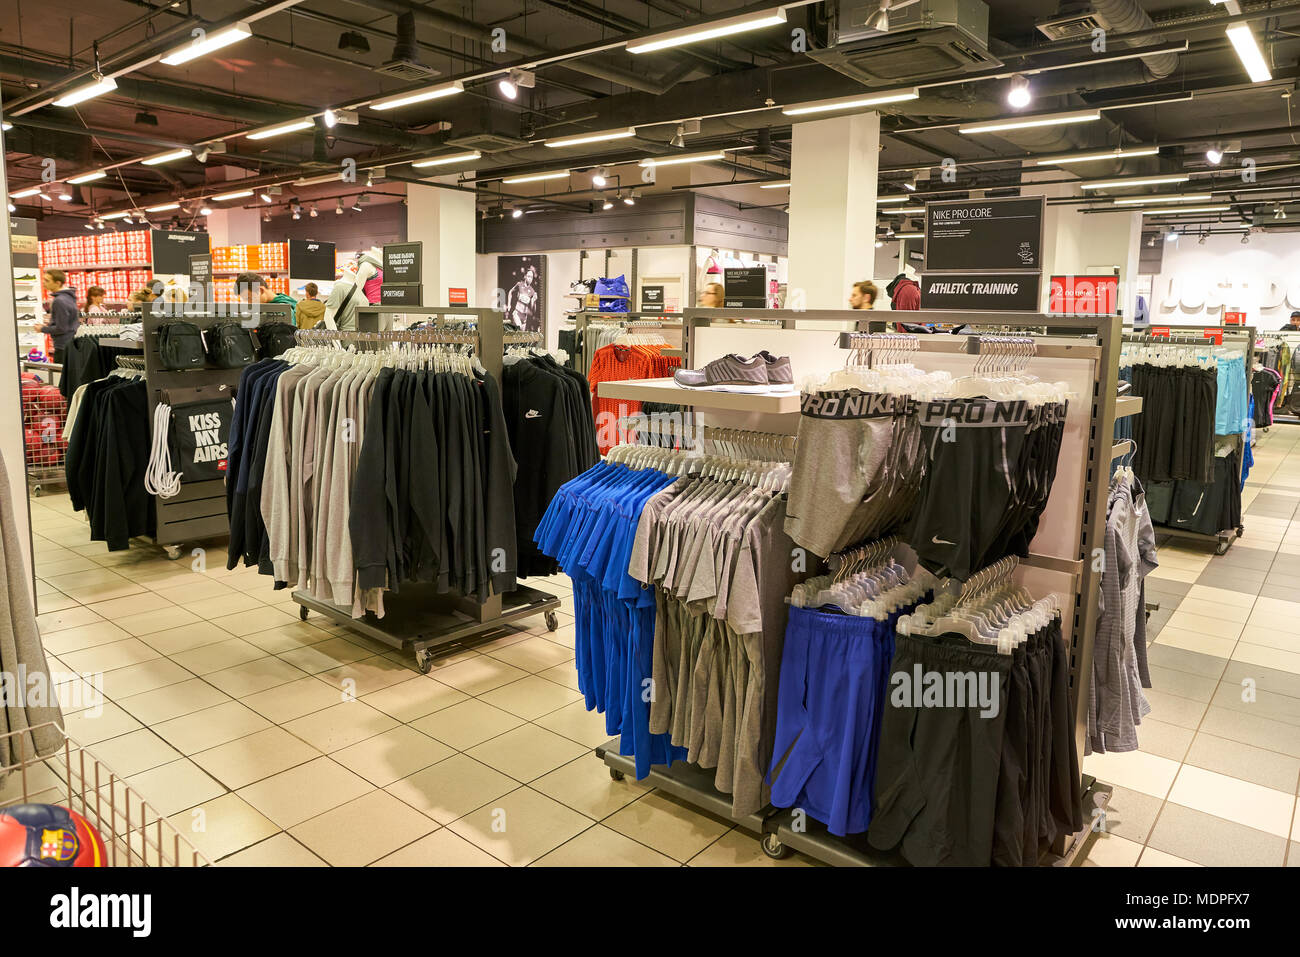 Nike Factory Store High Resolution Stock Photography and Images - Alamy